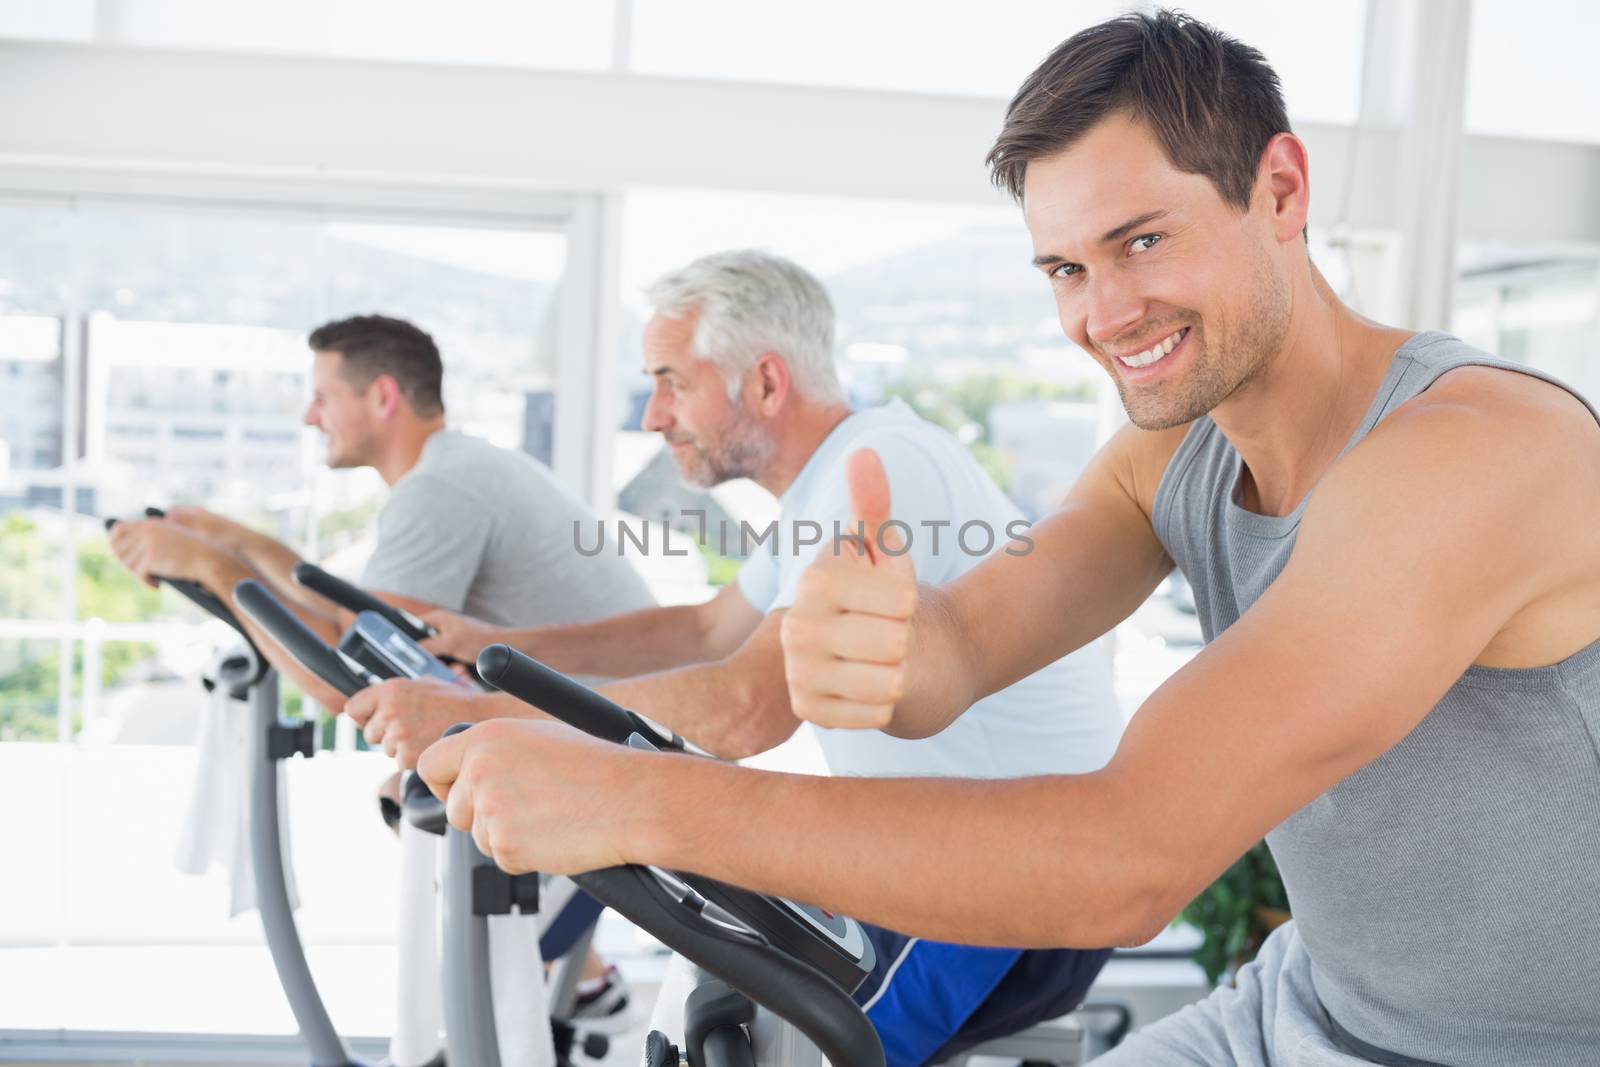 Portrait of happy man on exercise bike gesturing thumbs up at gym